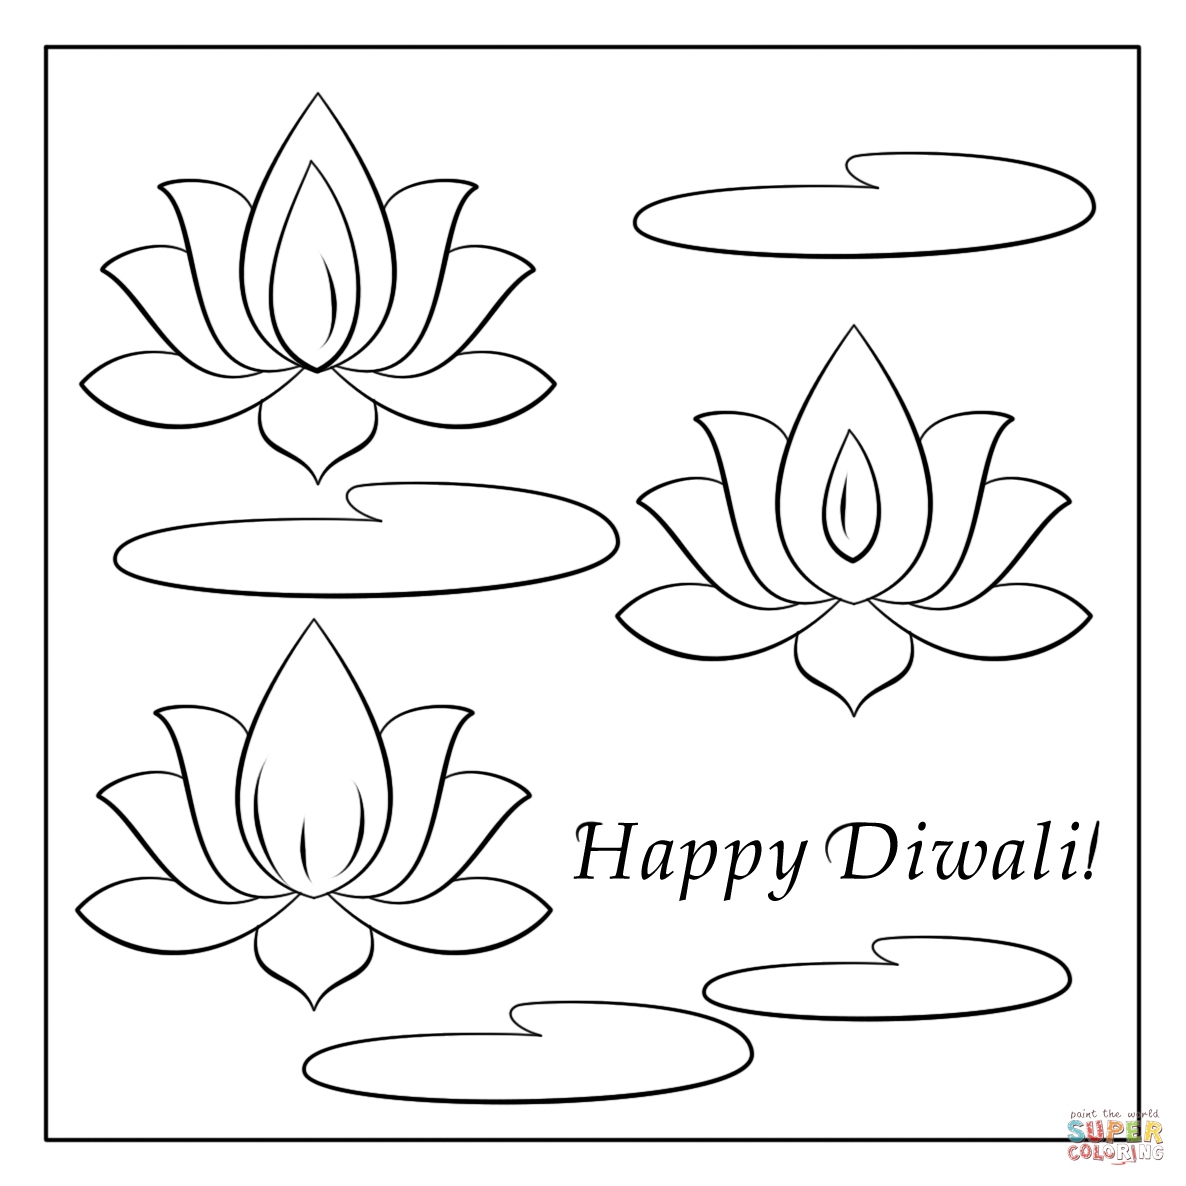 Diwali Colouring Pages at GetColorings.com | Free printable colorings